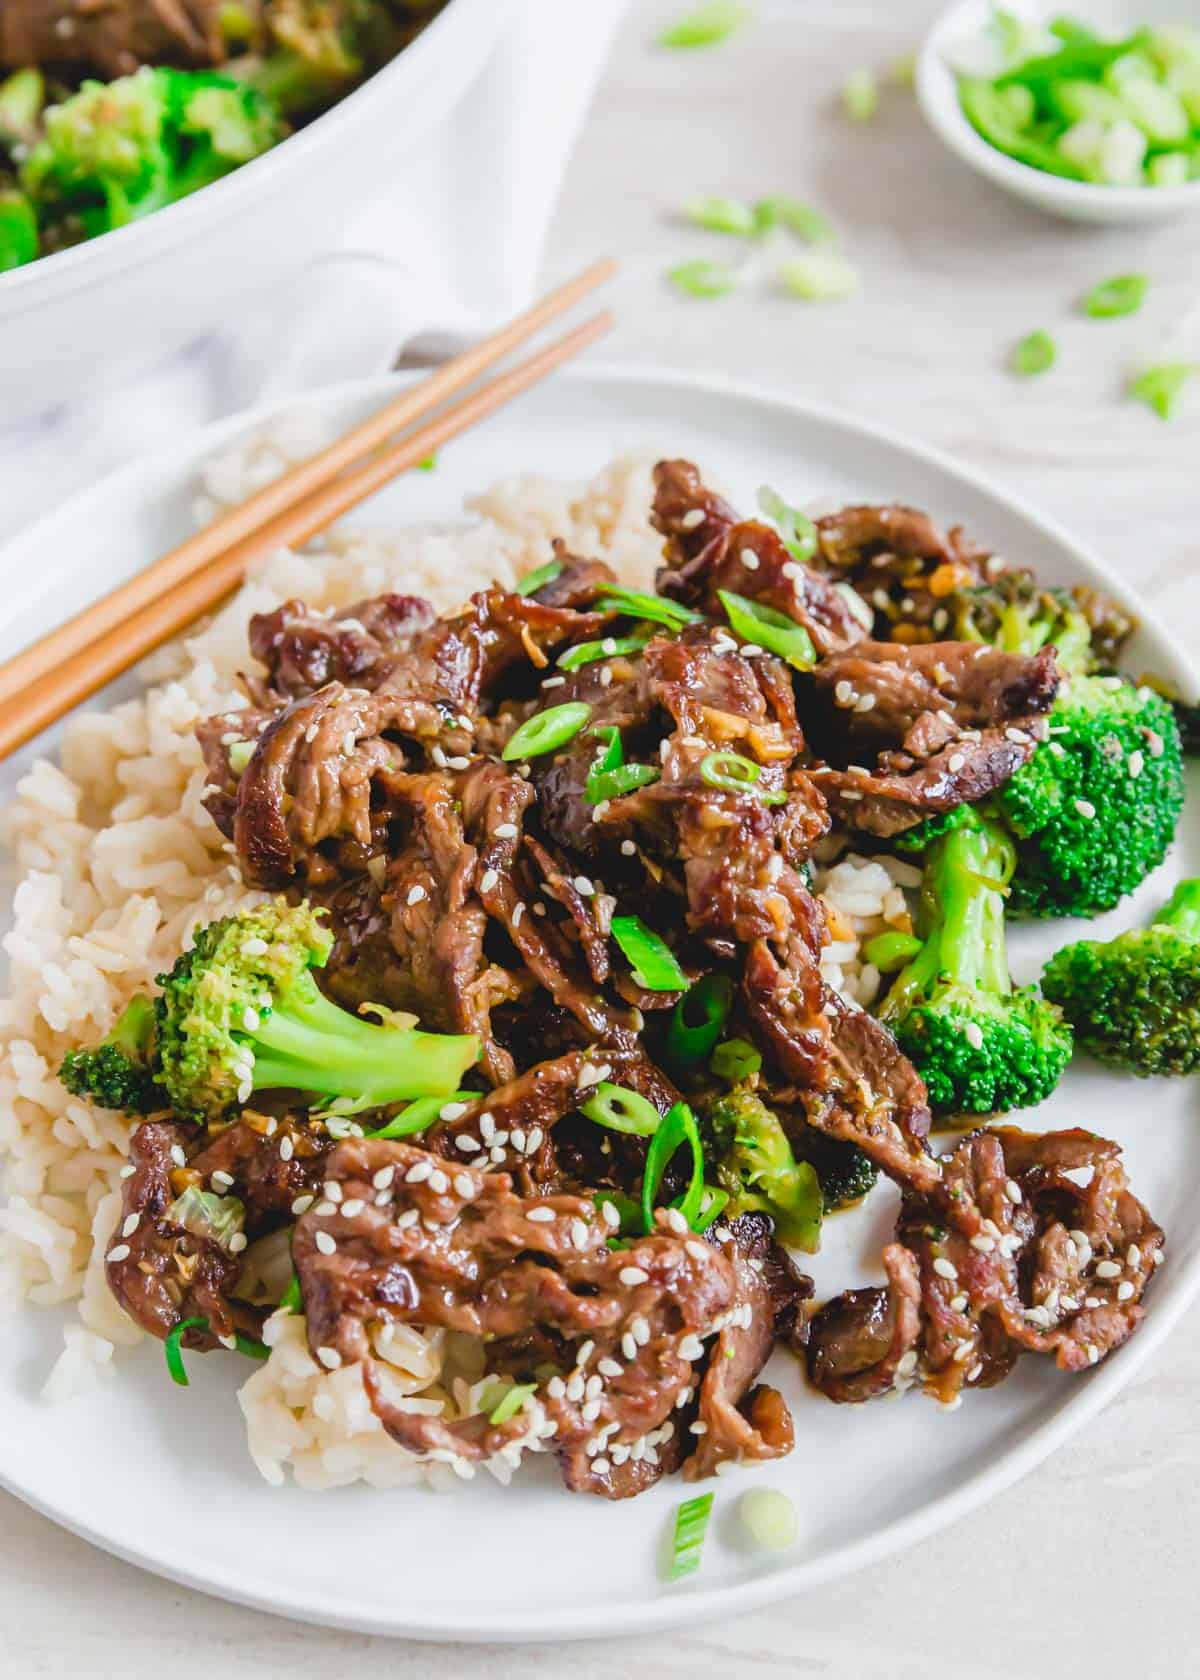 A plate of shaved beef and broccoli with chopsticks.